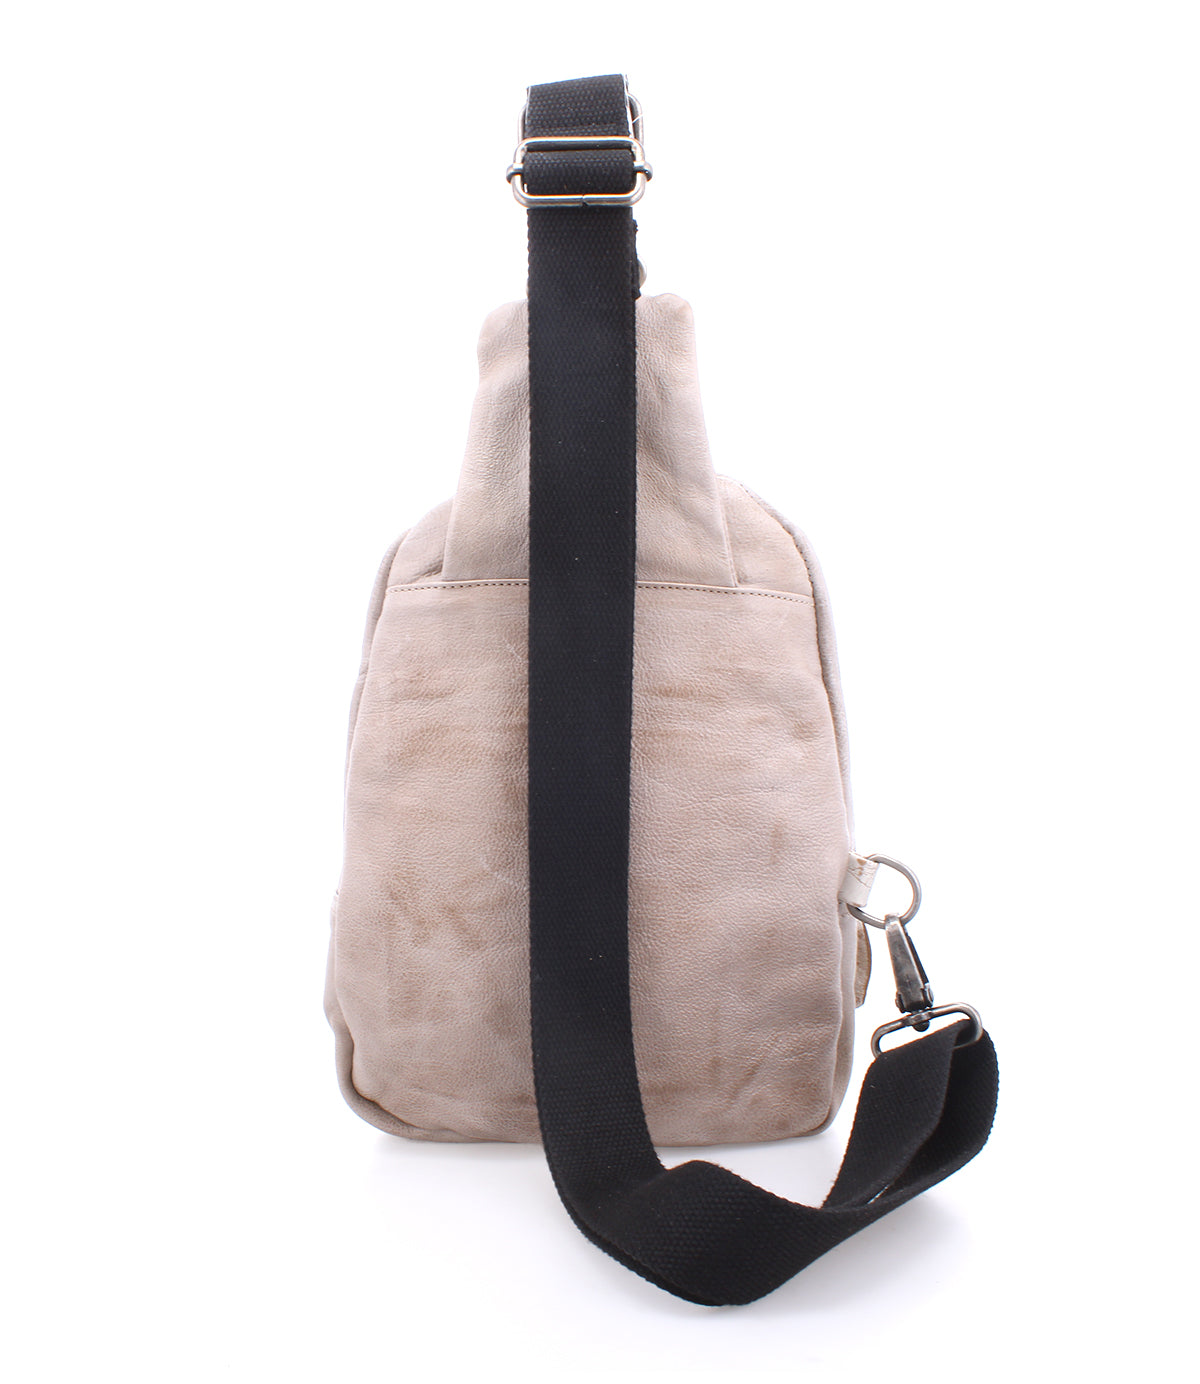 Sentence with replaced product name and brand name: A Beau shoulder bag from Bed Stu with a durable black strap, perfect for hands-free activities.